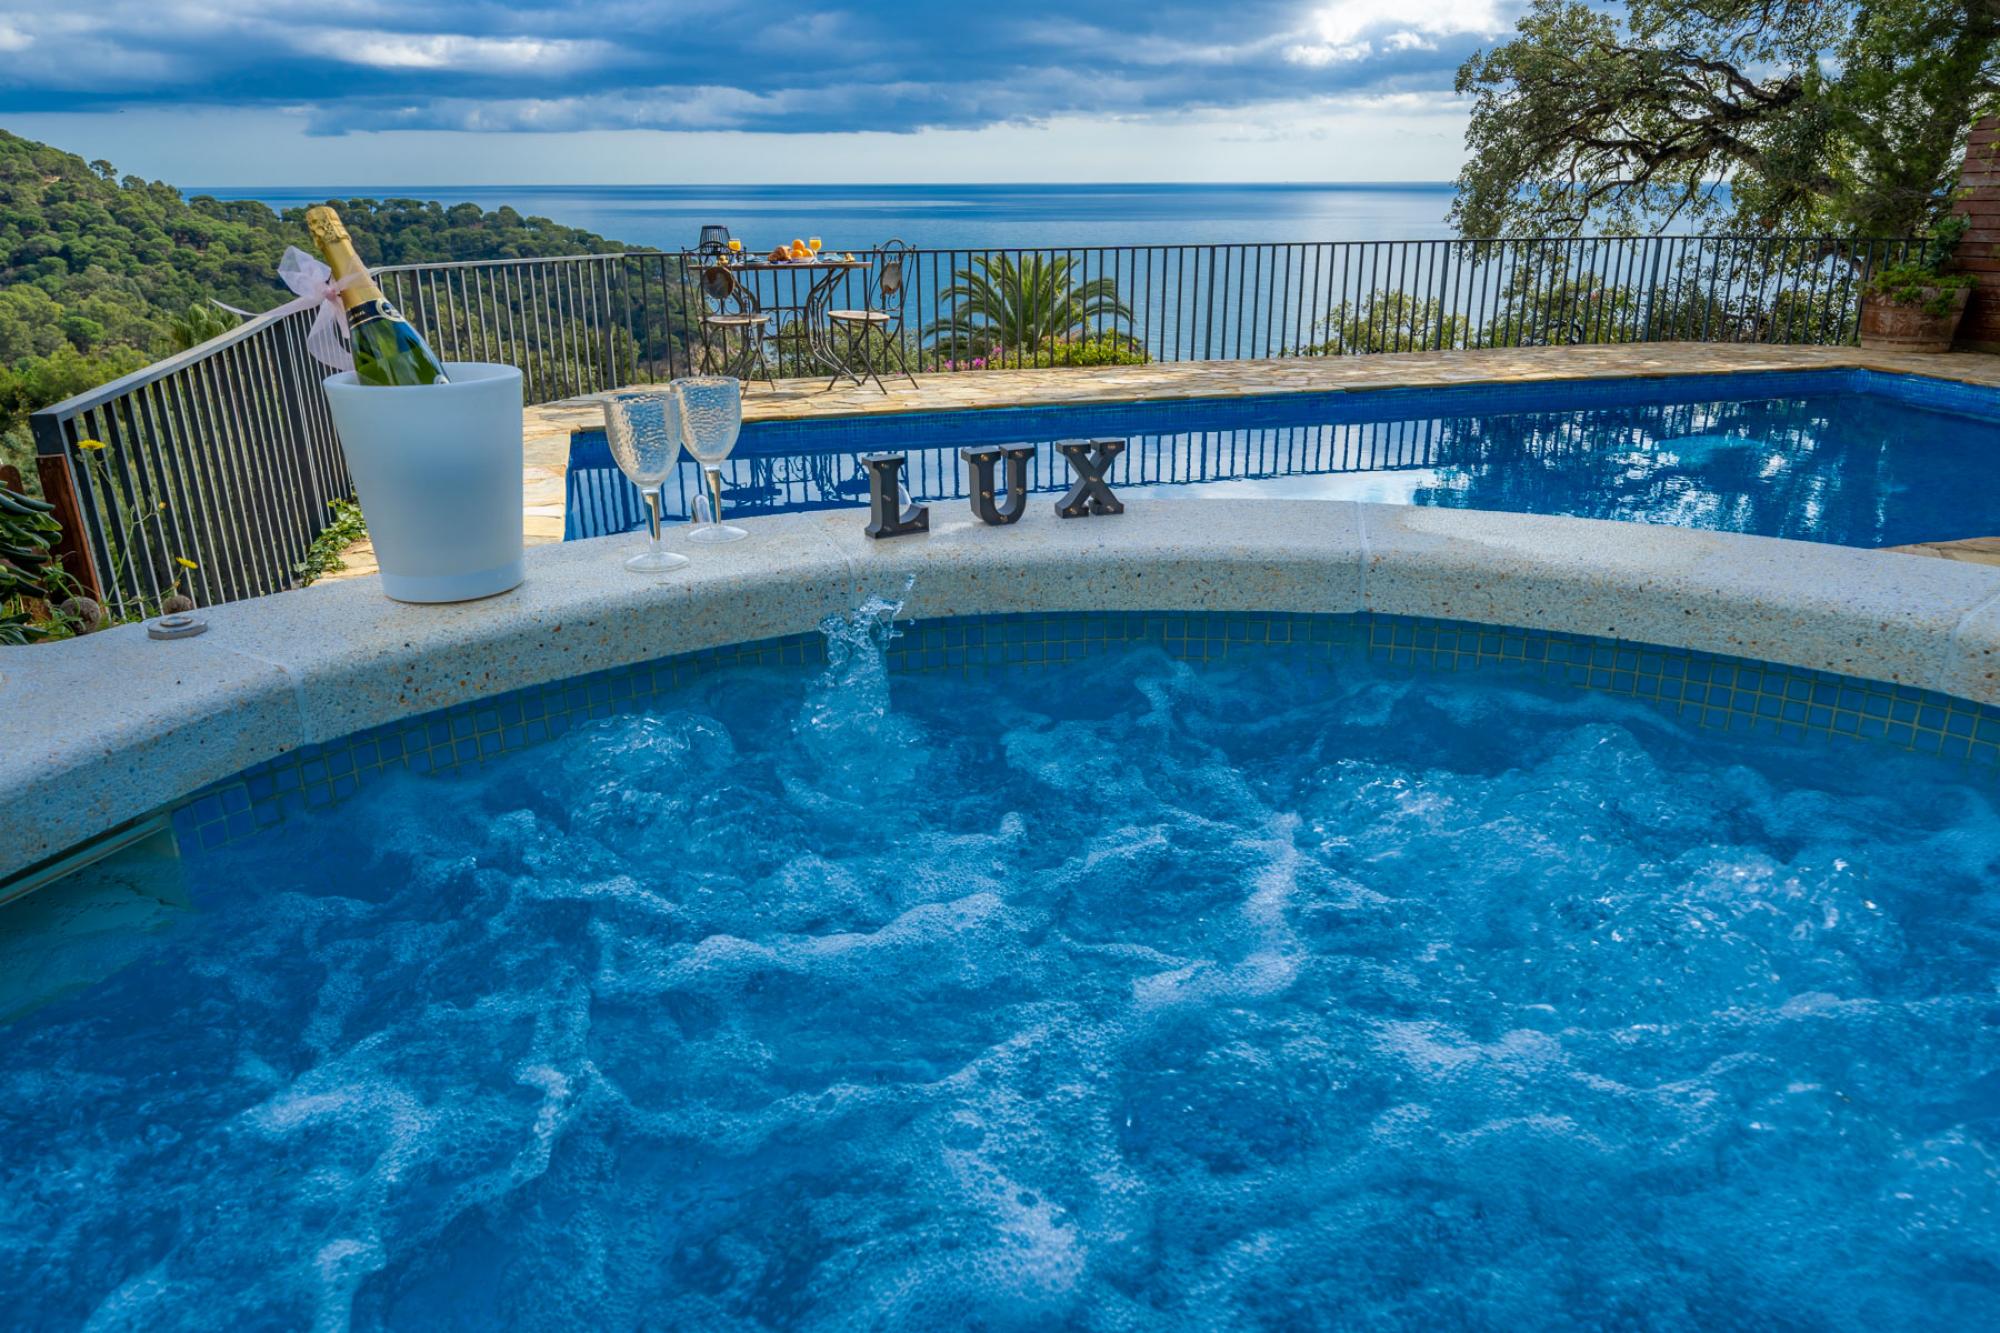 Property Image 2 - VILLA CAN TONI LUX  Fantastic Villa facing the sea with pool and outdoor jacuzzi